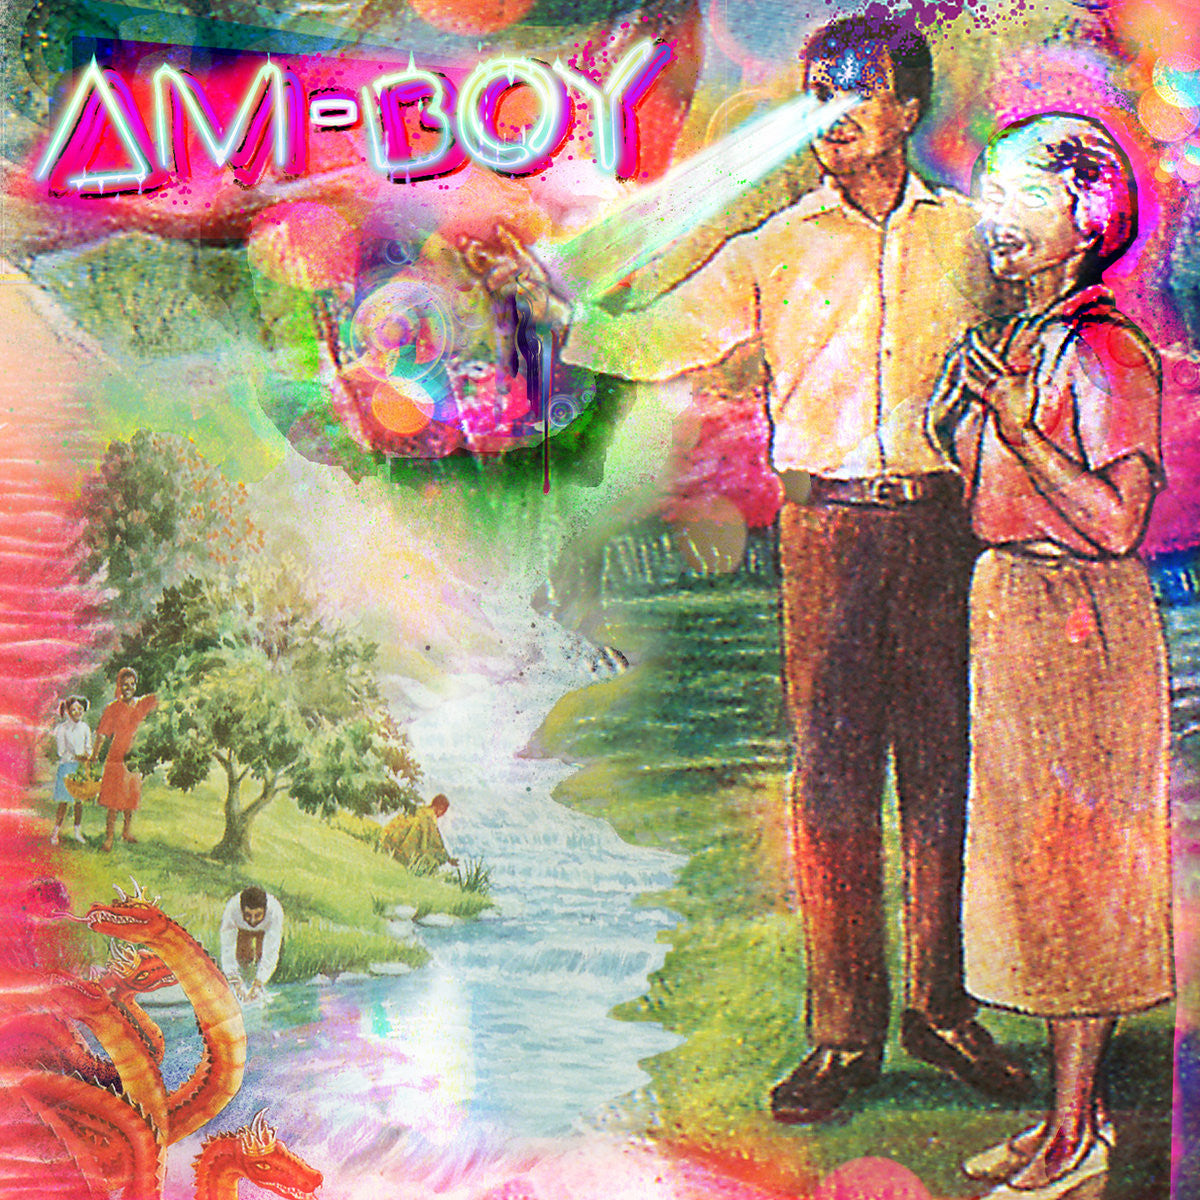 Am-Boy - Horrible Oracle Blessedness